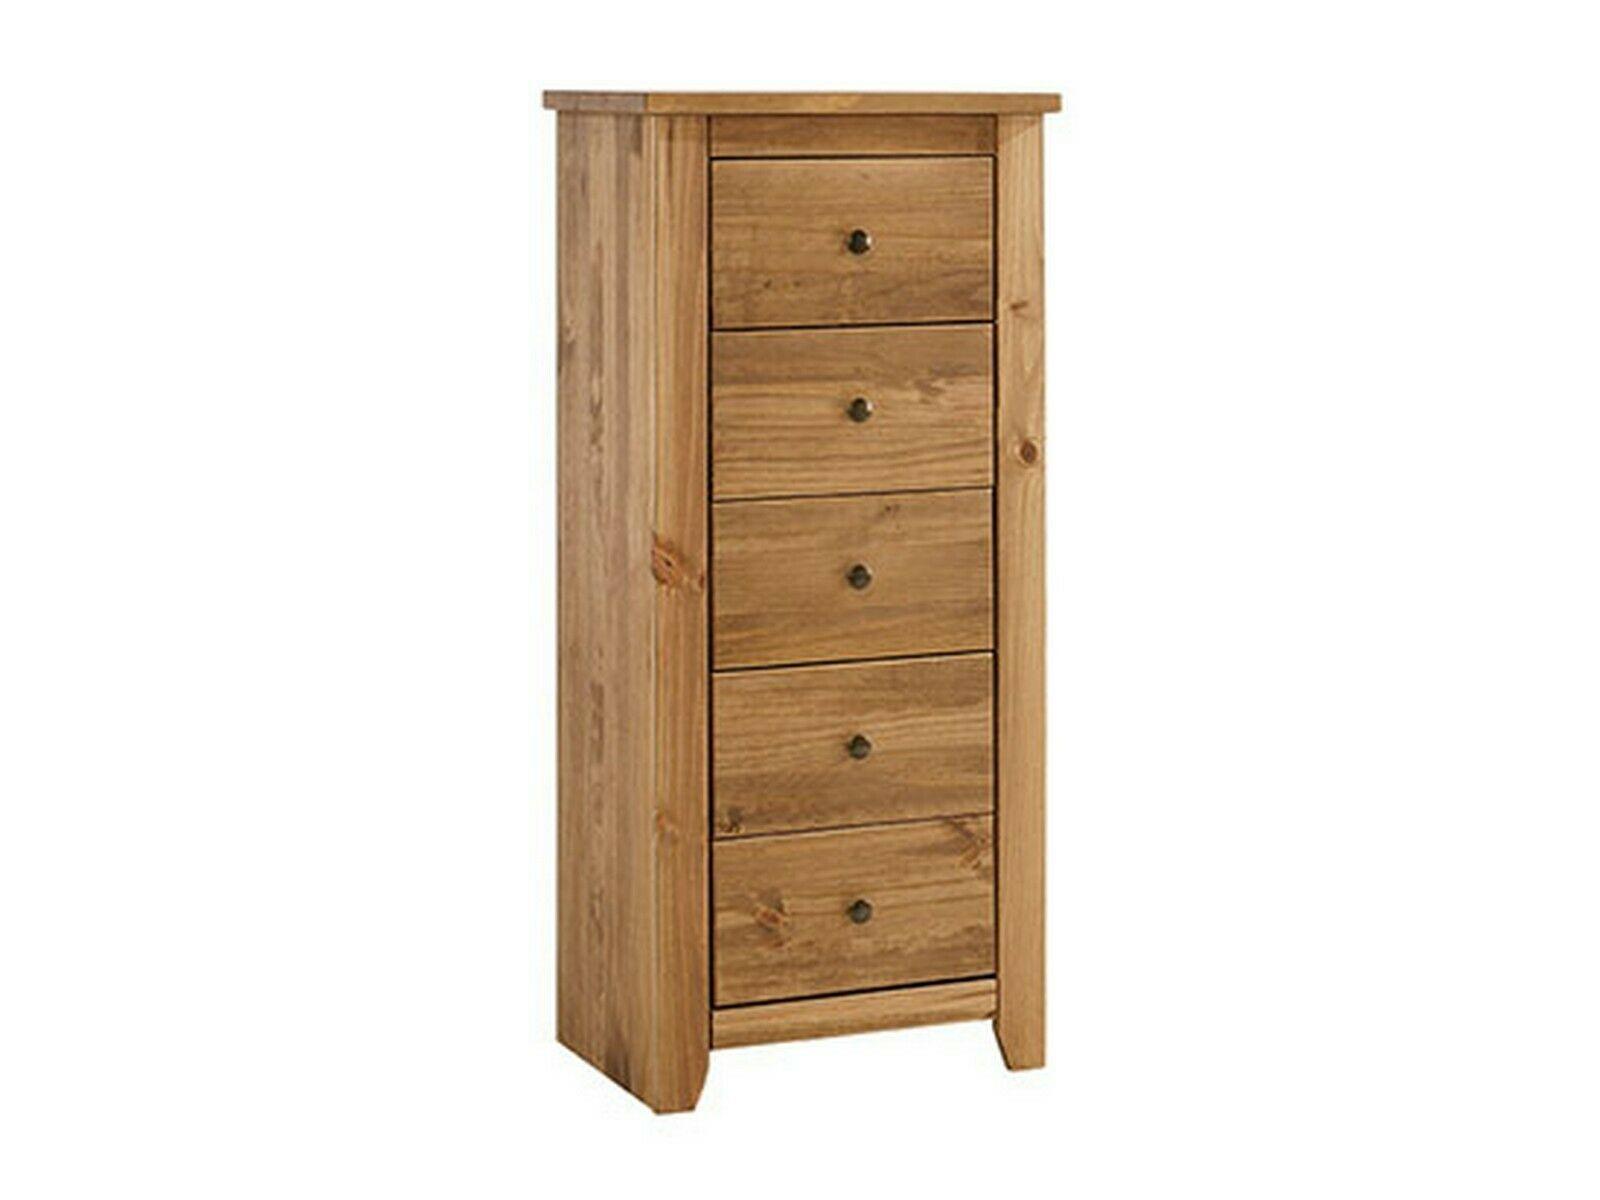 Bedroom Furniture - loveyourbed.co.uk